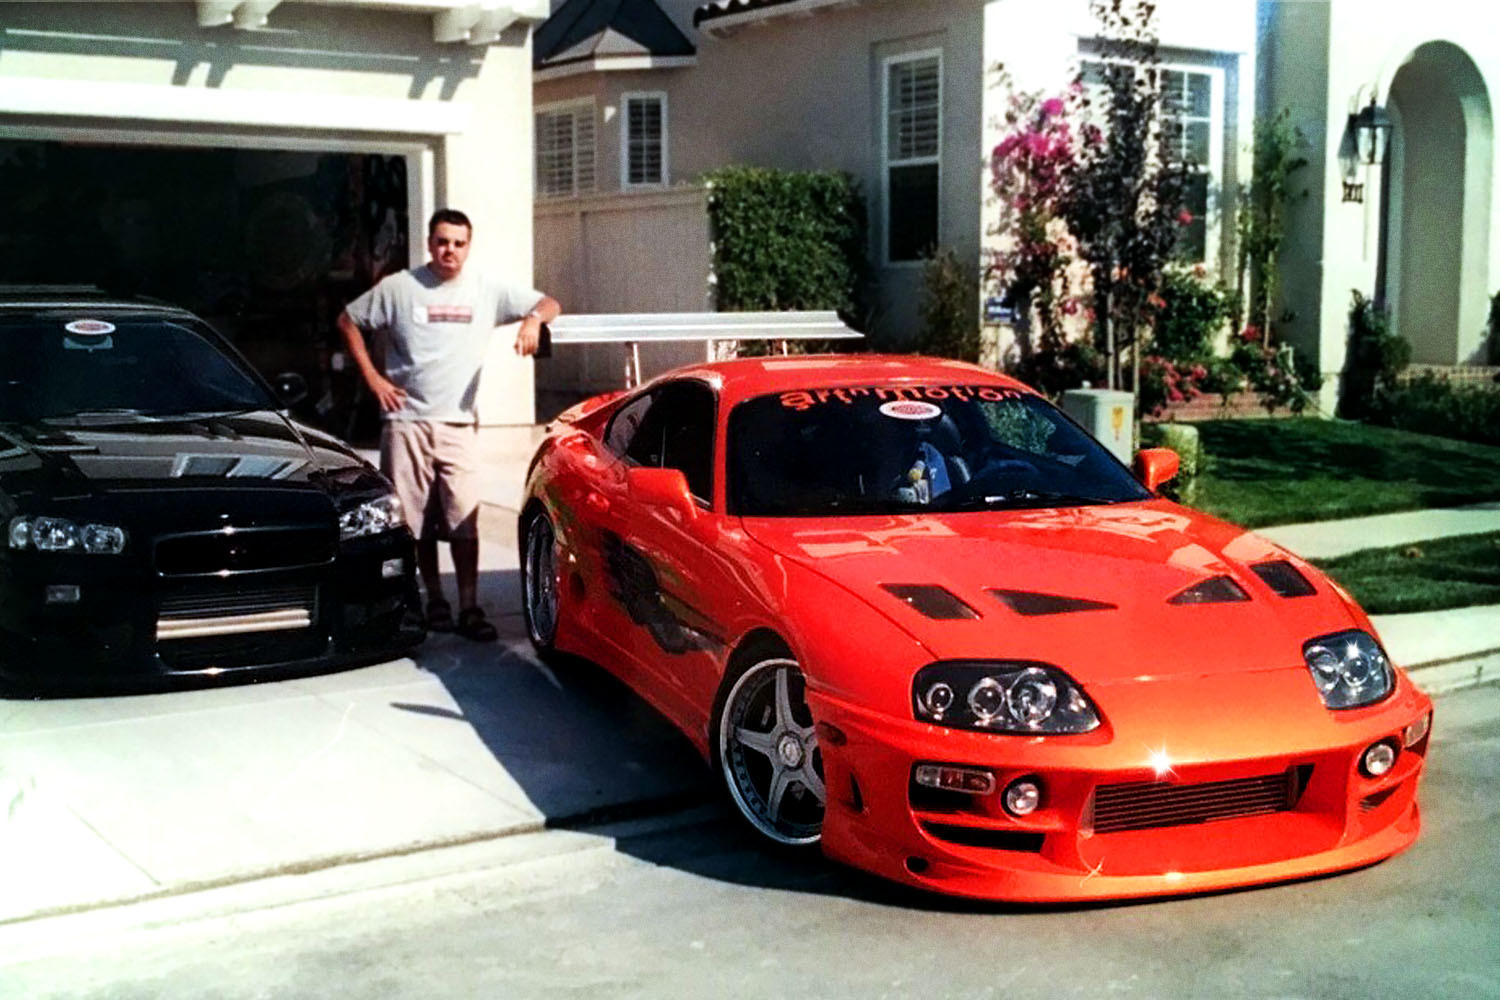 Craig Lieberman, technical advisor on the first two Fast and Furious movies, standing next to his orange Toyota Supra